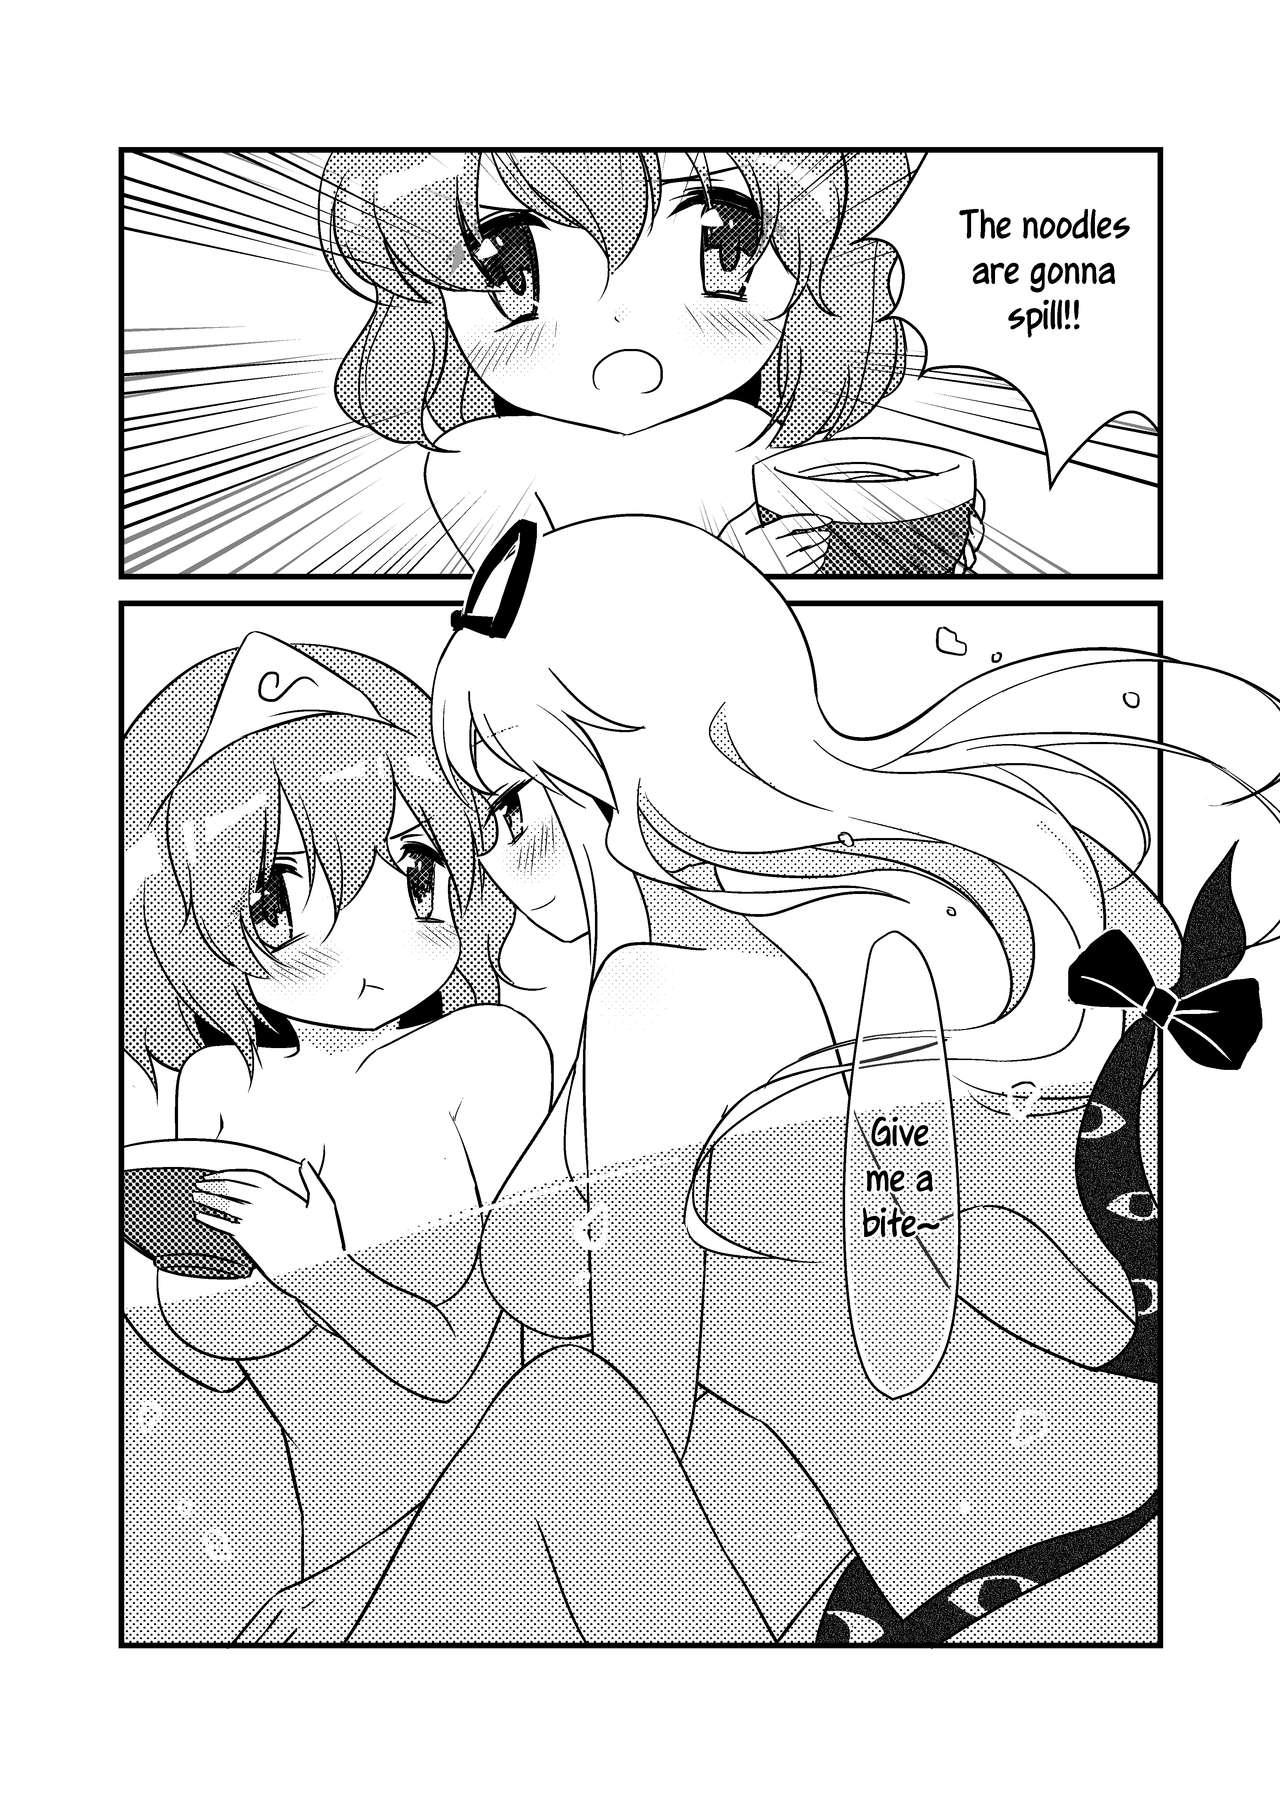 Blacks ????一起泡温泉吧！ | ????Let's Soak in the Hot Spring! - Touhou project Ruiva - Page 6